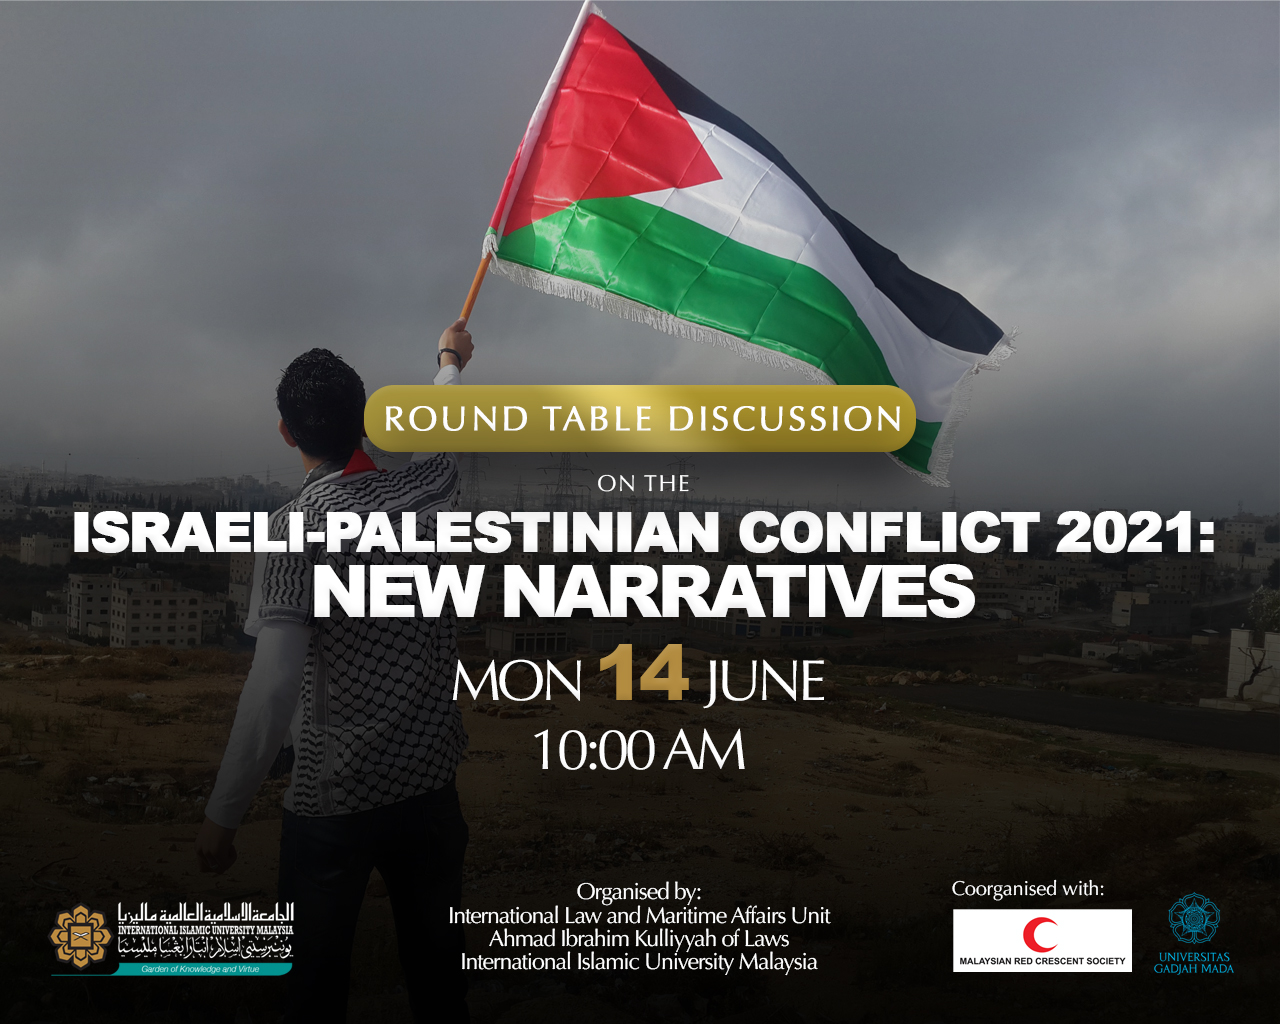 ROUND TABLE DISCUSSION ON THE ISRAELI-PALESTINIAN CONFLICT 2021: NEW NARRATIVES